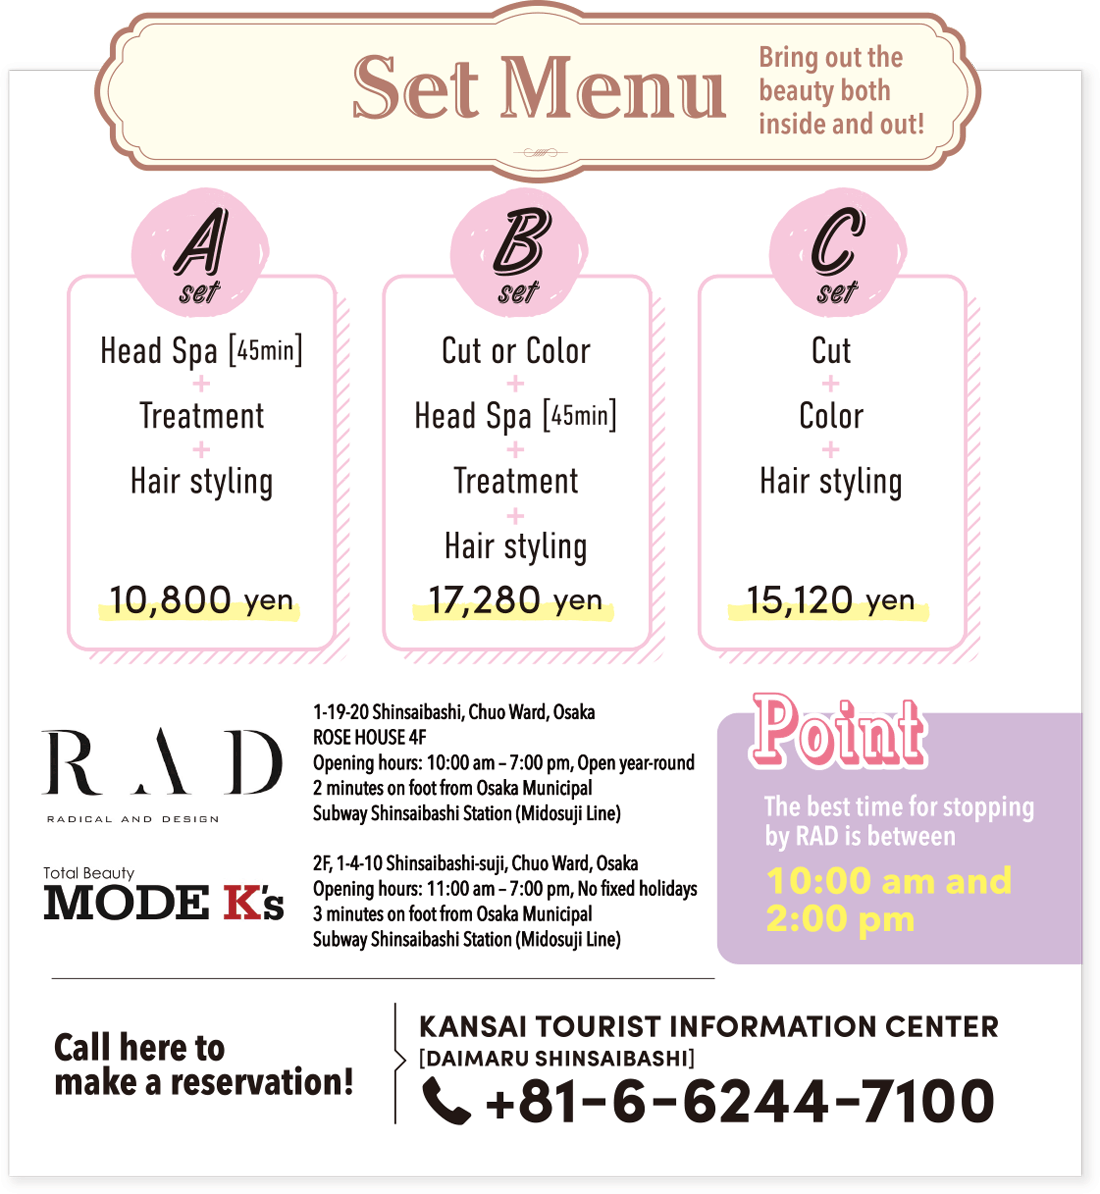 Set Menu Bring out the beauty both inside and out! / TEL：+81-6-6244-7100